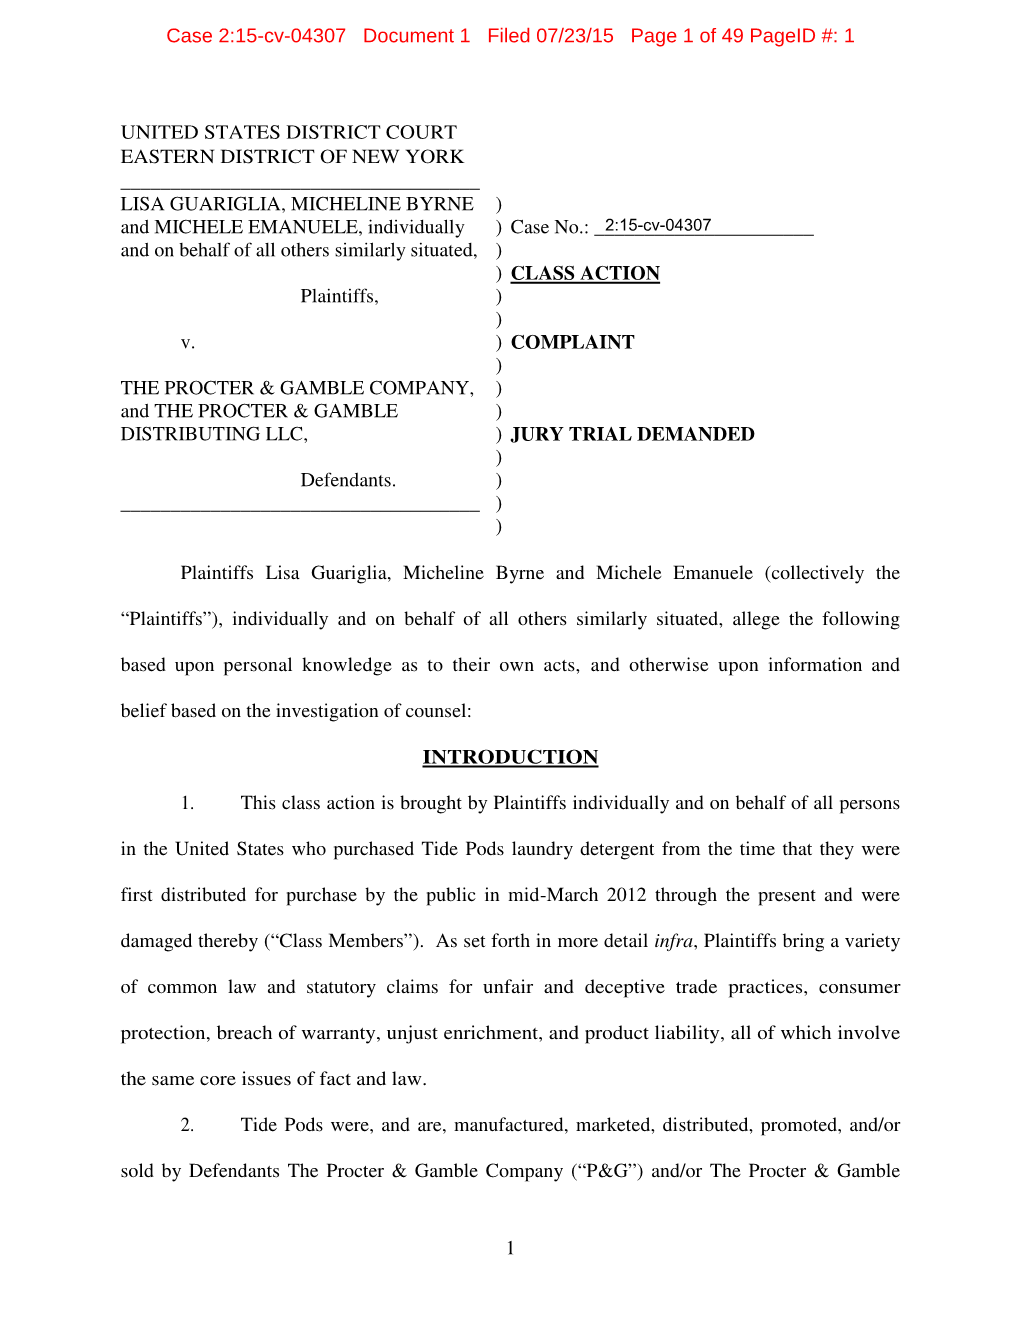 Case 2:15-Cv-04307 Document 1 Filed 07/23/15 Page 1 of 49 Pageid #: 1